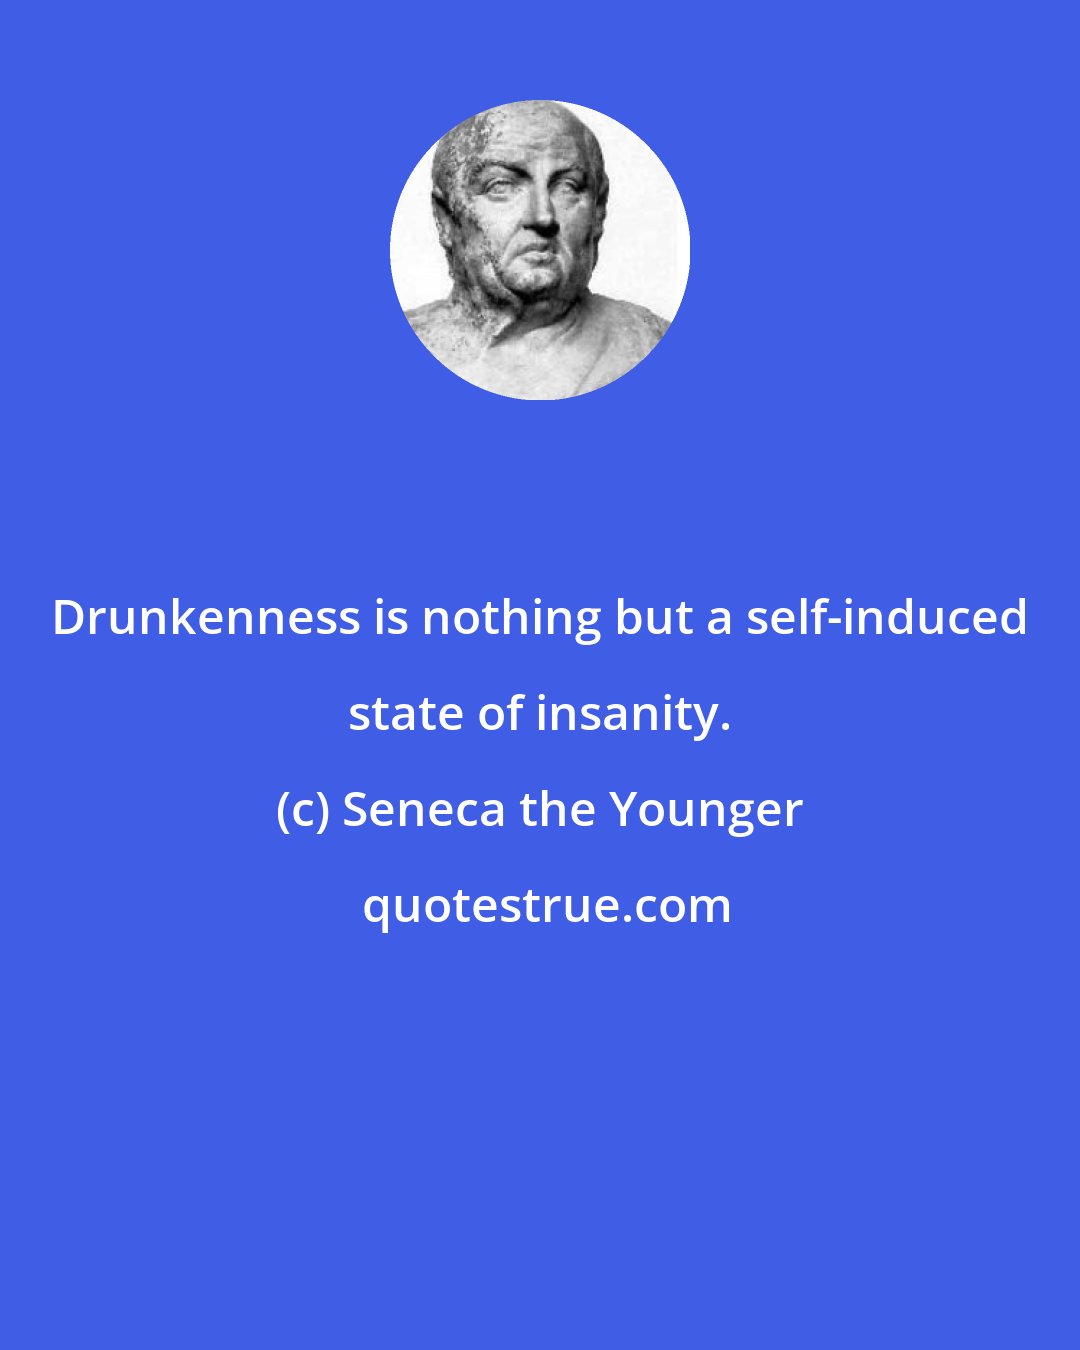 Seneca the Younger: Drunkenness is nothing but a self-induced state of insanity.